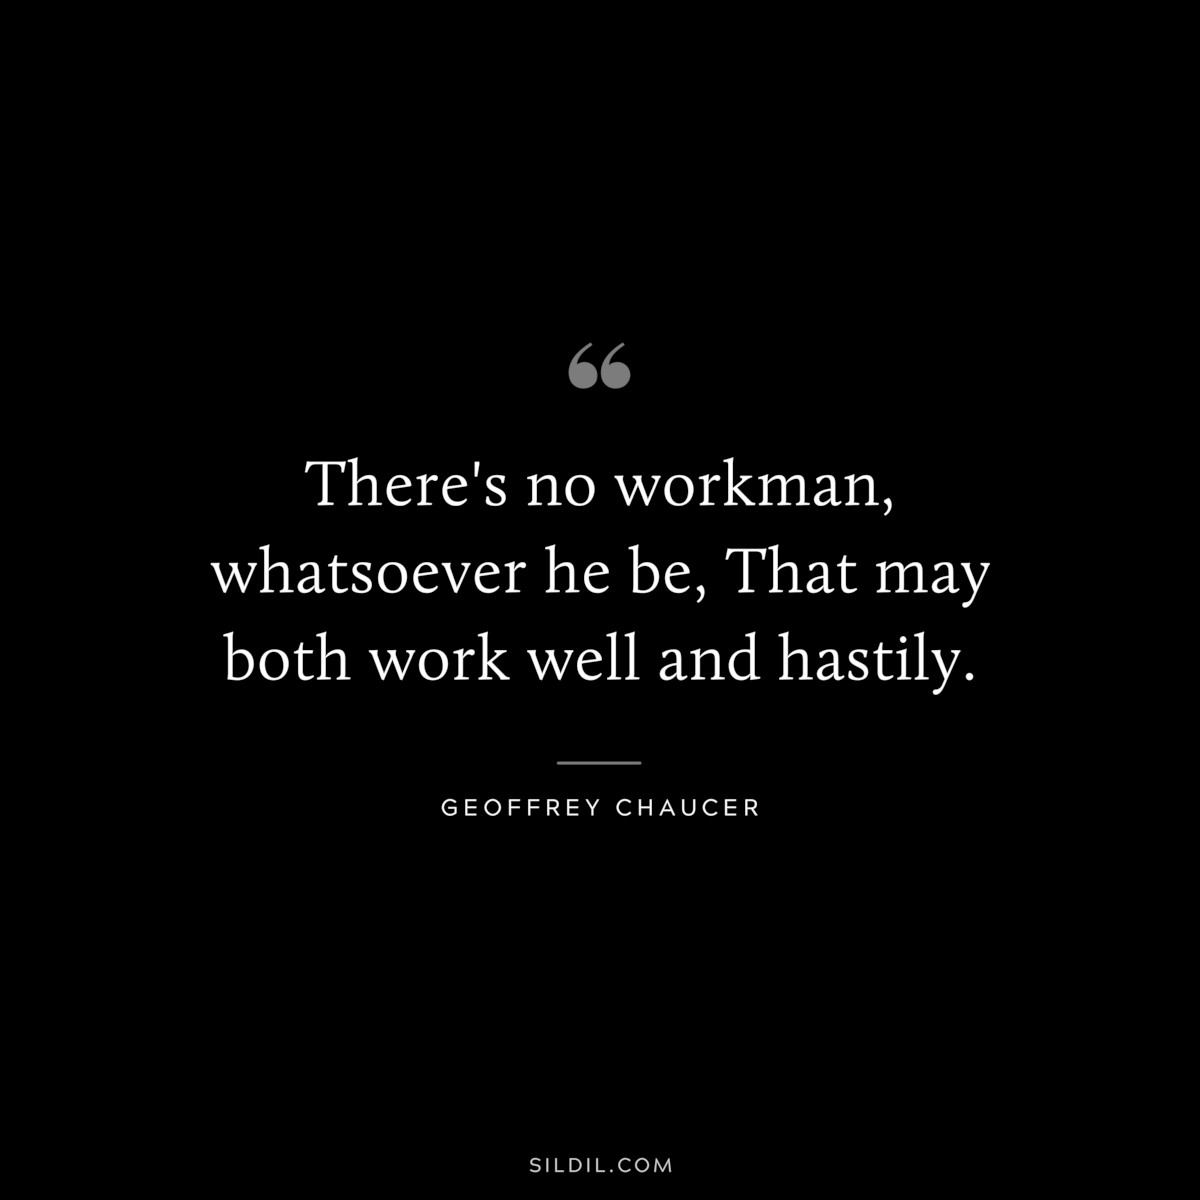 There's no workman, whatsoever he be, That may both work well and hastily. ― Geoffrey Chaucer